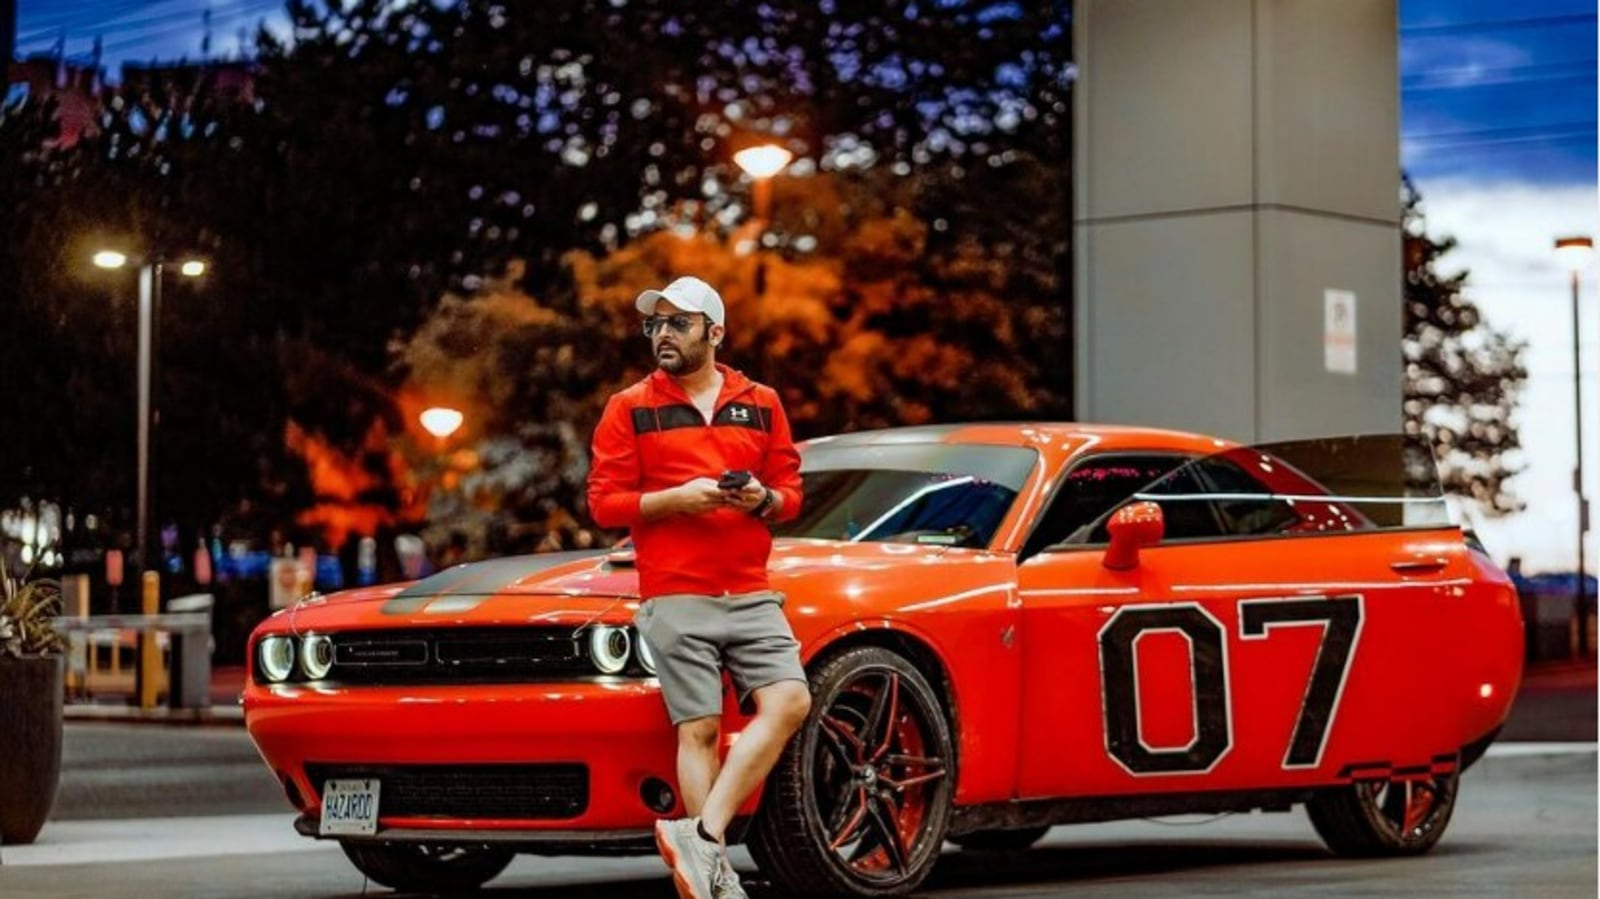 Kapil Sharma goes for ‘walk’ in Canada in Dodge Challenger Hellcat, fans say ‘kya style hai’